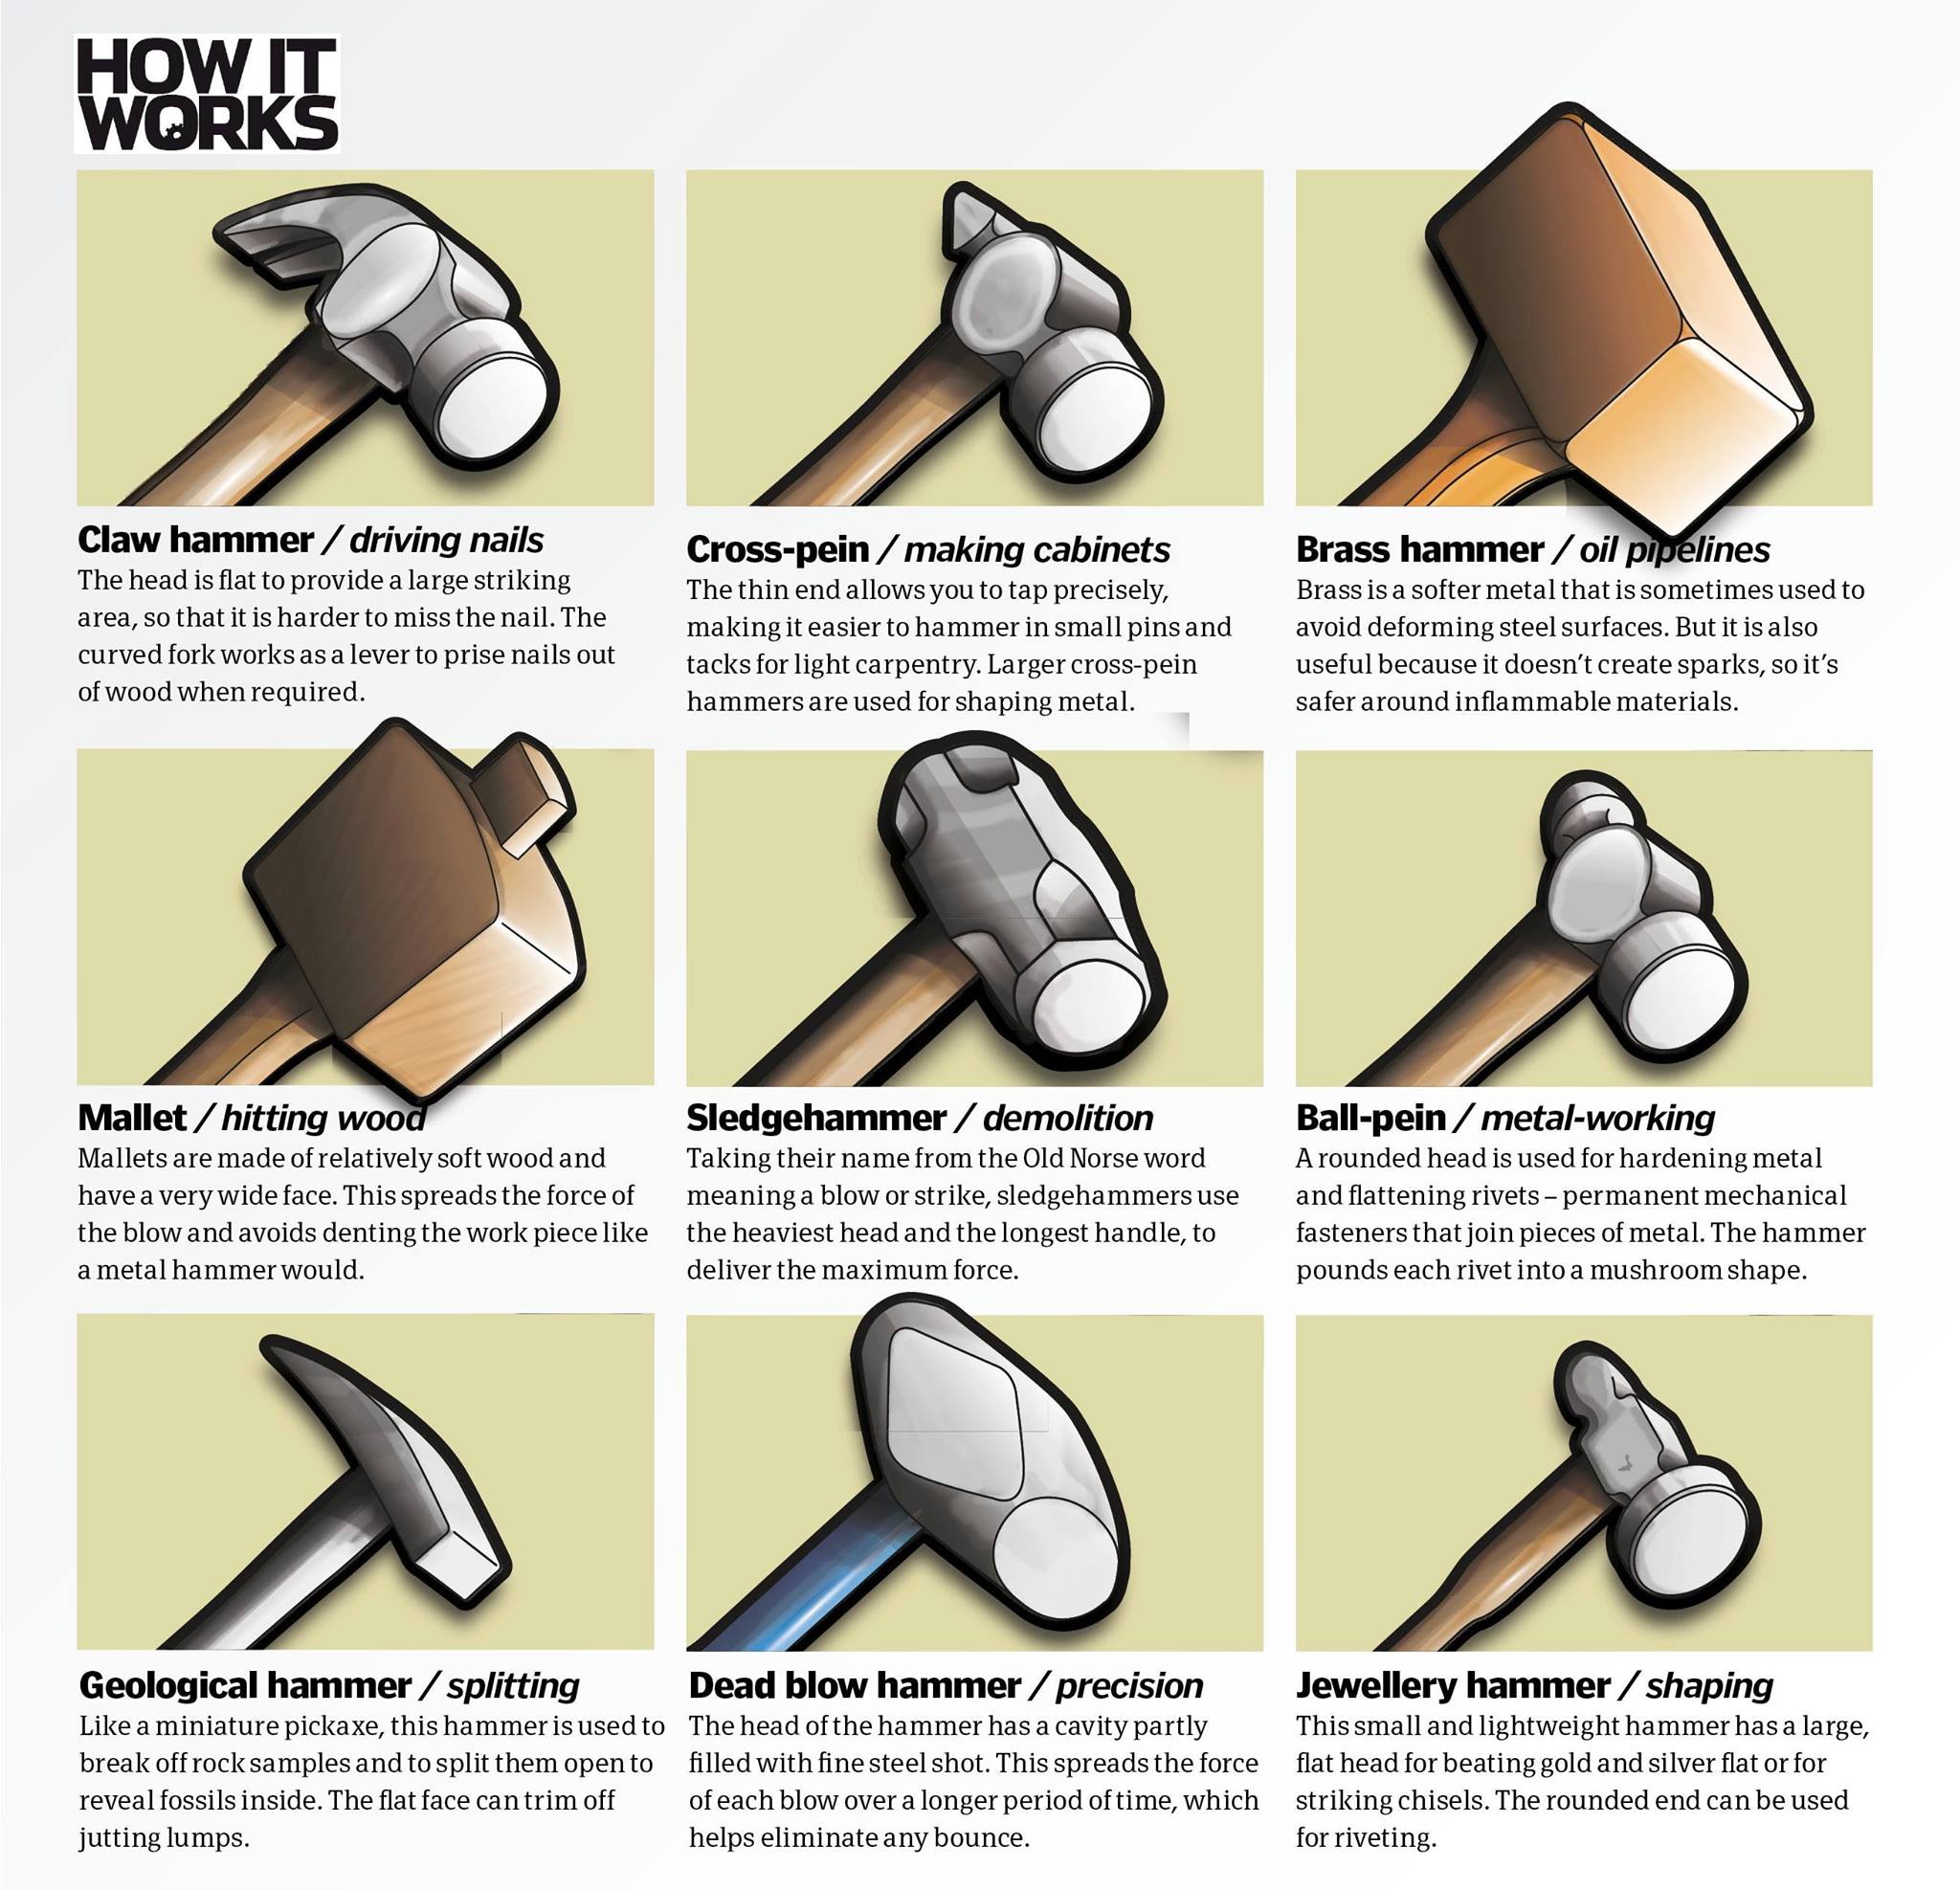 hammer types and uses - How It Works Brass hammeroil pipelines Brass is a softer metal that is sometimes used to Claw hammer driving nails The head is flat to provide a large striking area, so that it is harder to miss the nail. The curved fork works as a